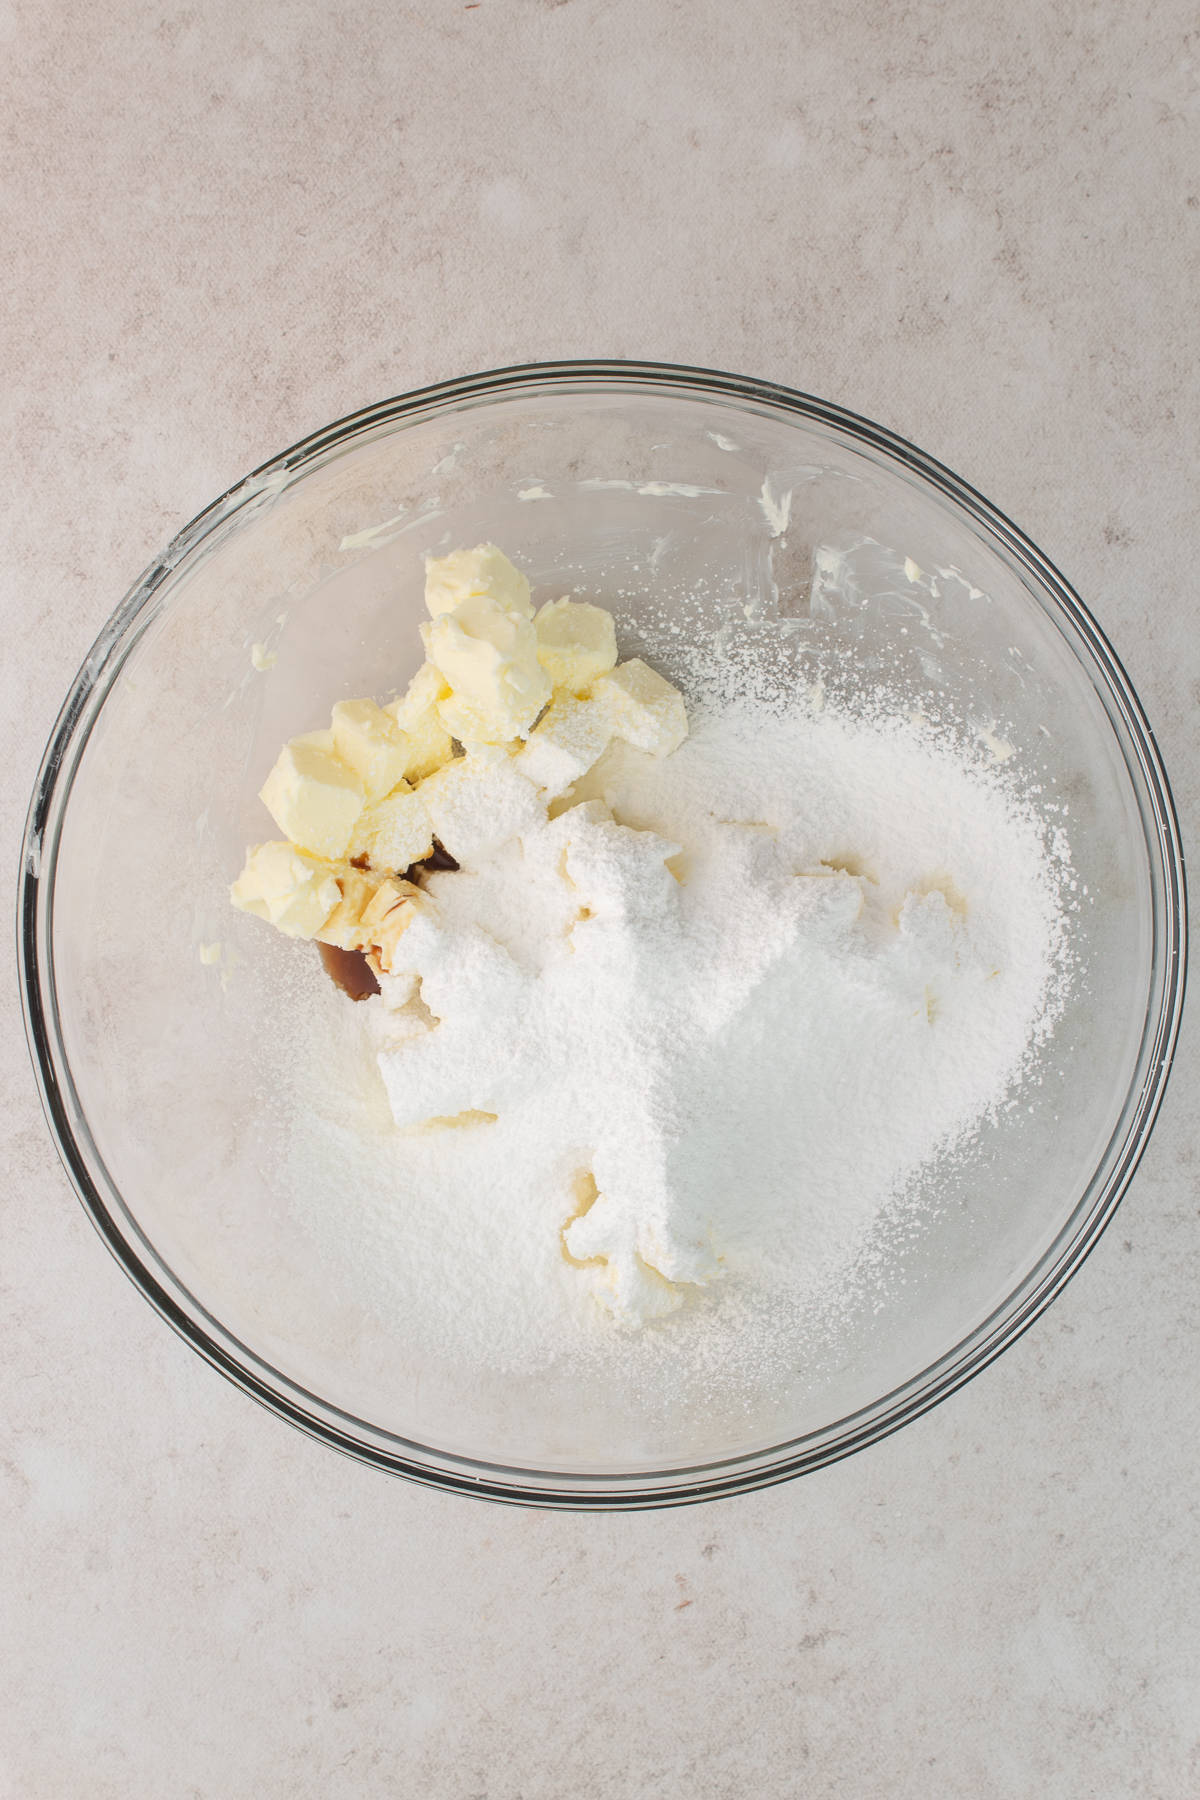 Butter, powder sugar and vanilla are in a glass bowl